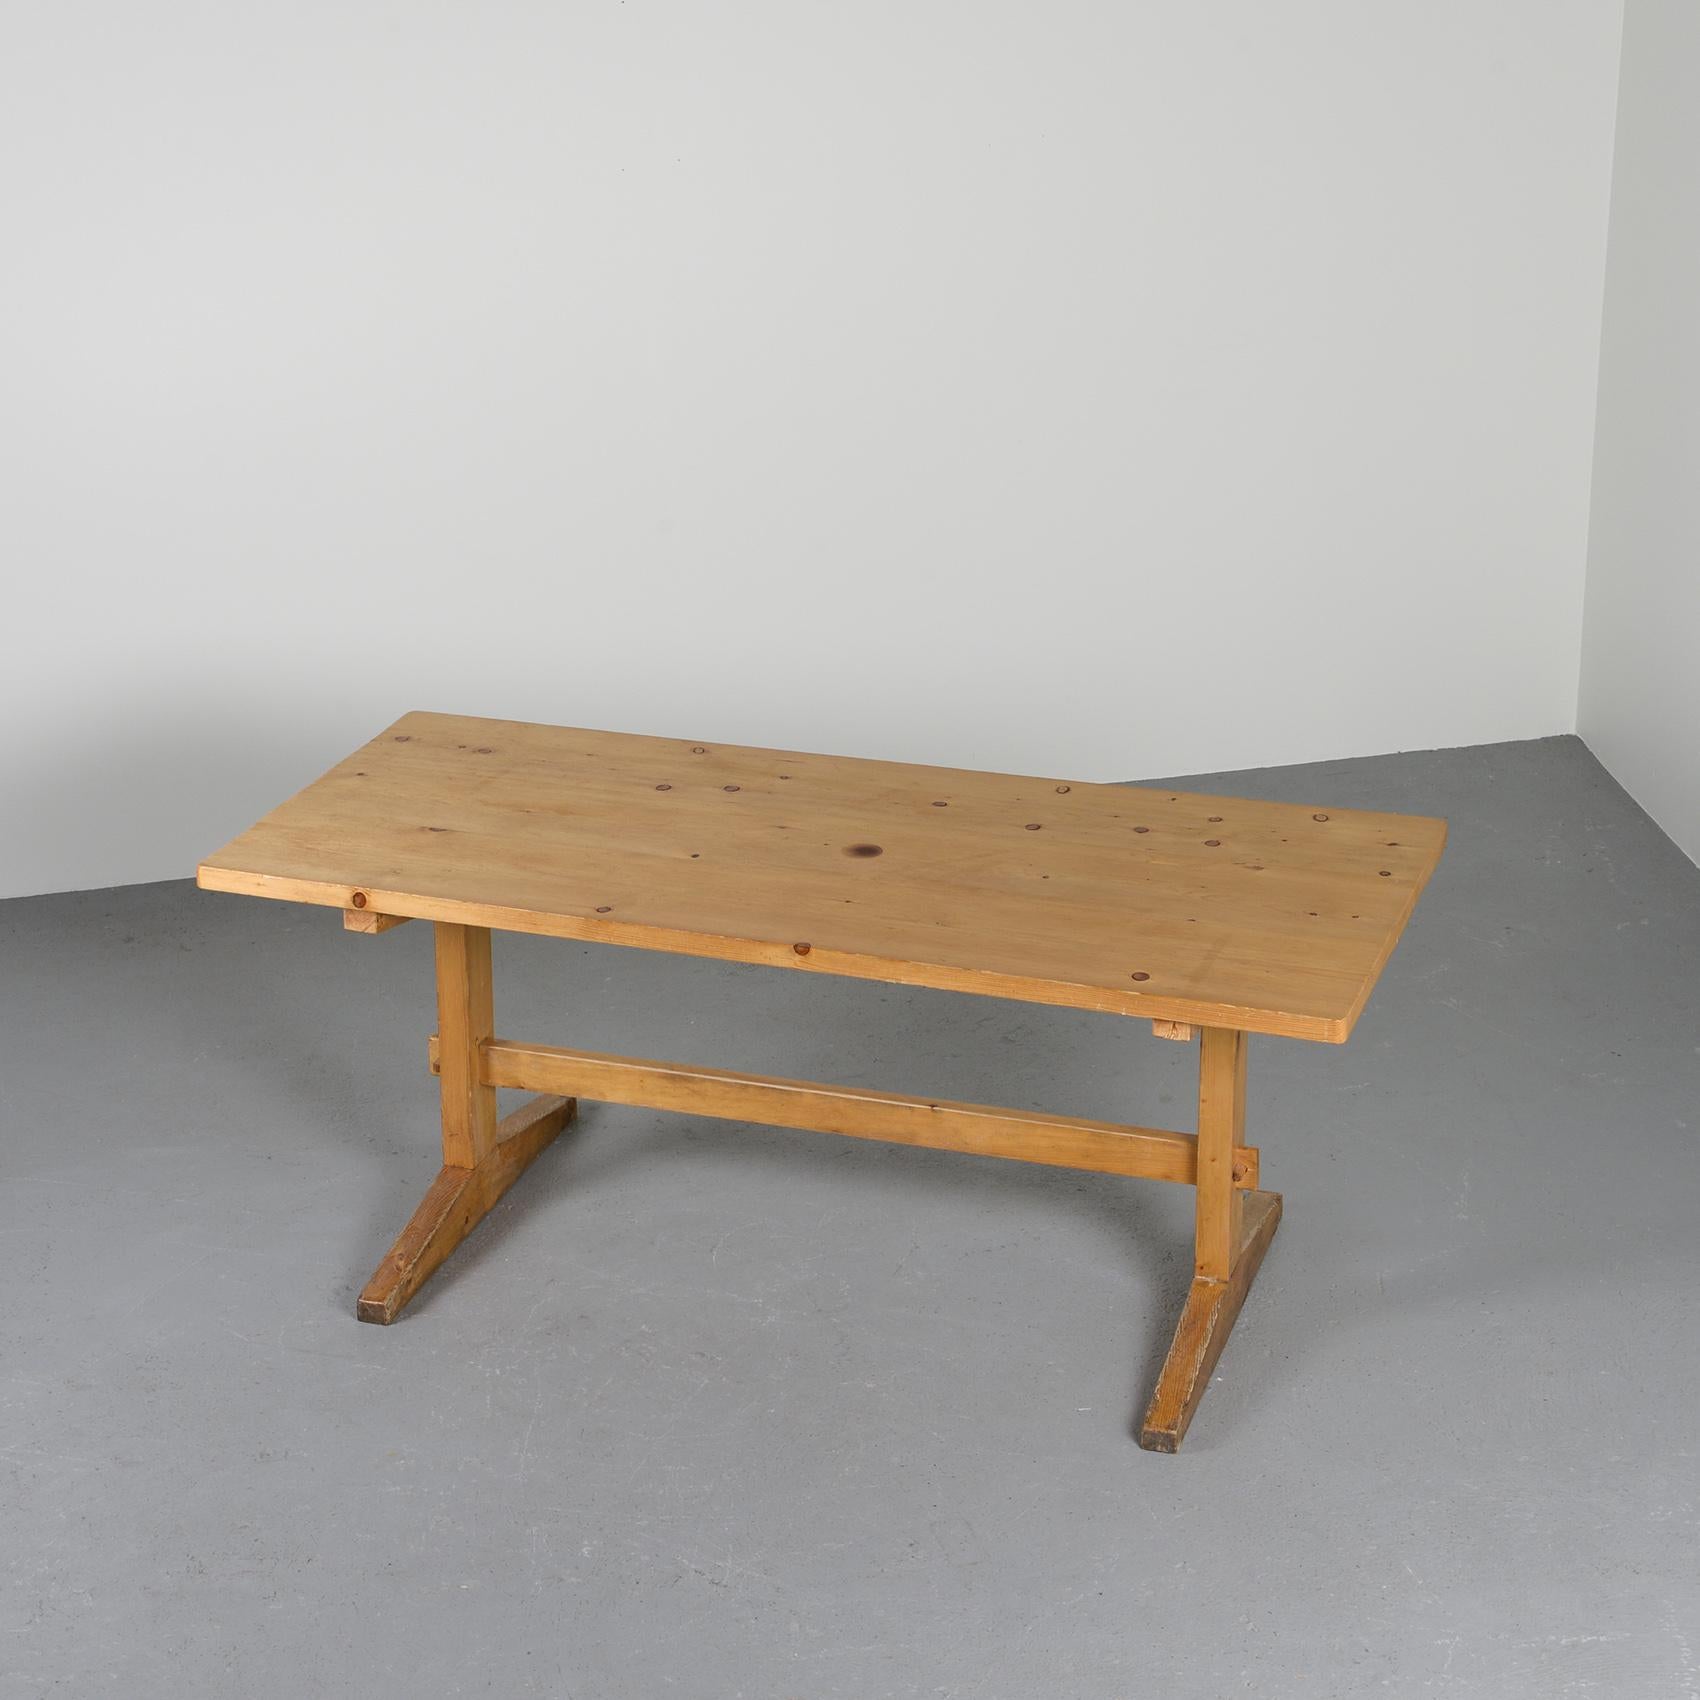 Dining table by Christian Durupt that will be perfect to welcome many guests.

It is made of solid pine wood and has a rectangular table top.

Origin: Méribel ski resort, French Alps, circa 1970.